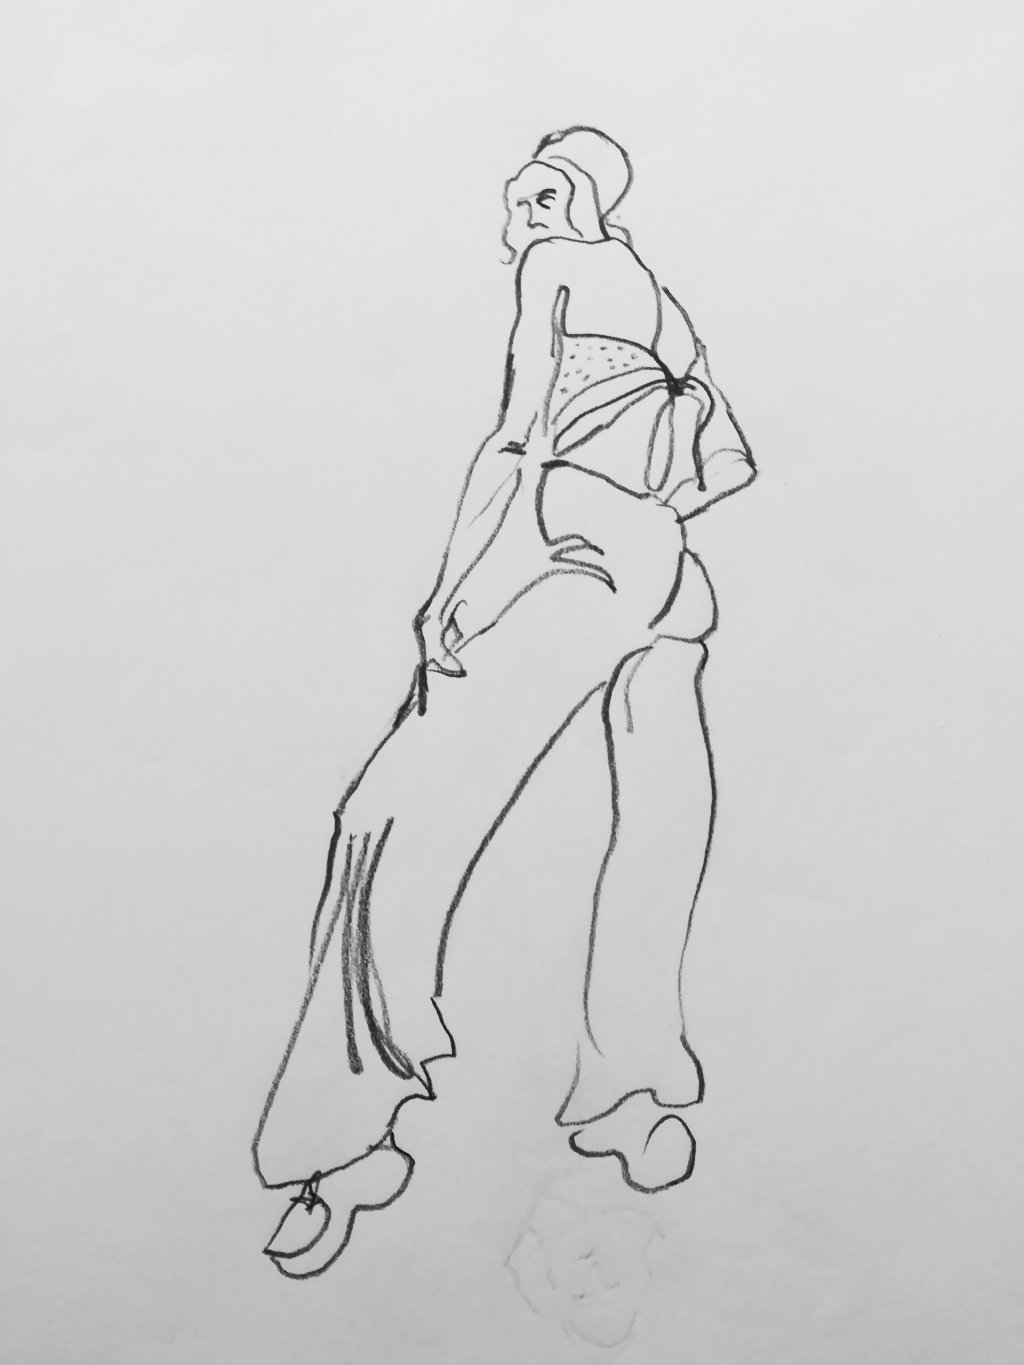 On the runway pencil drawing